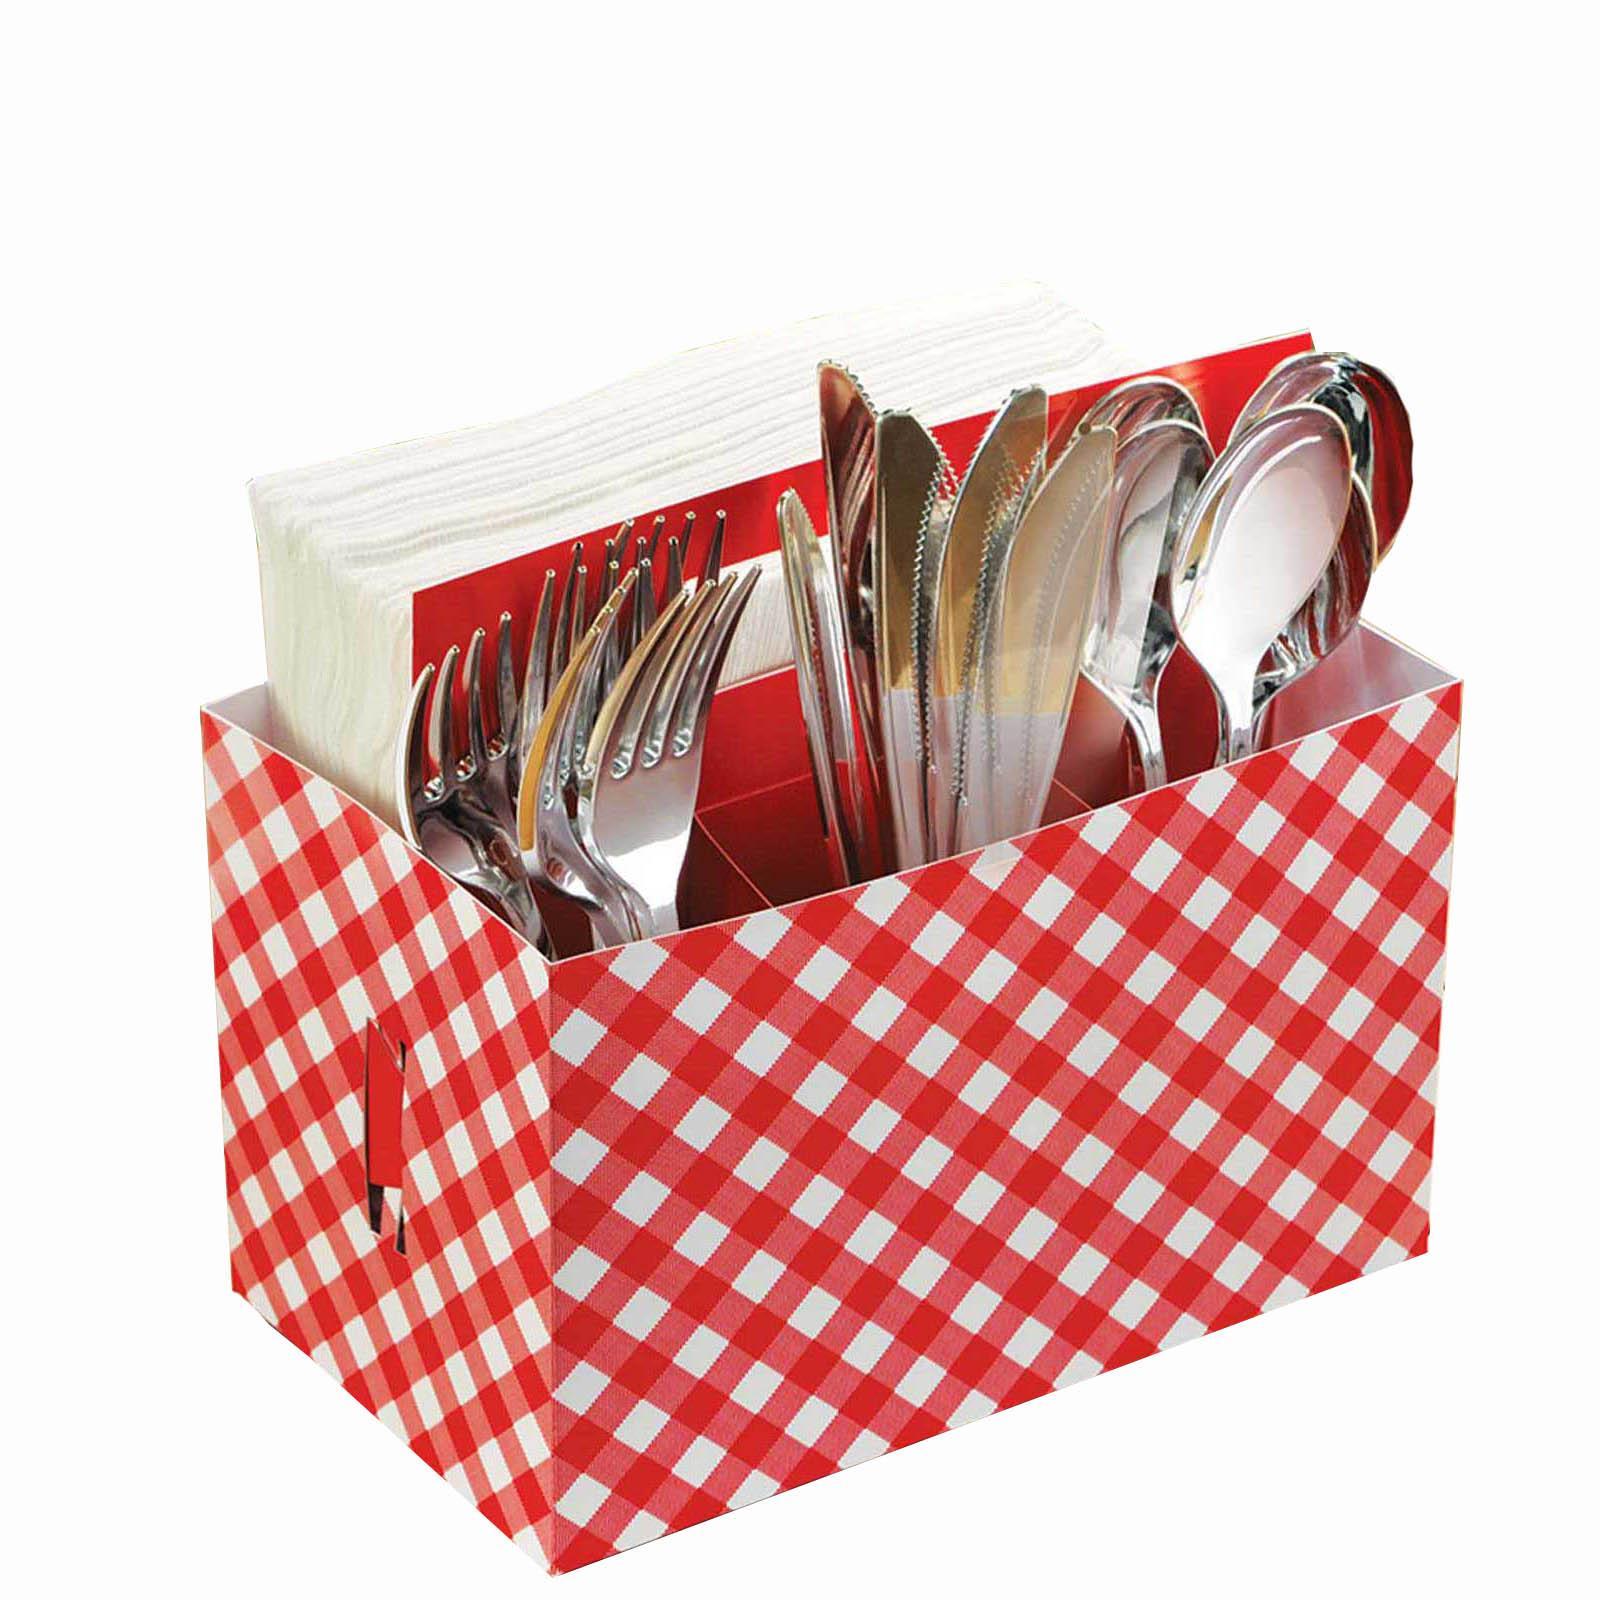 Picnic Party Utensil Caddy Cardboard